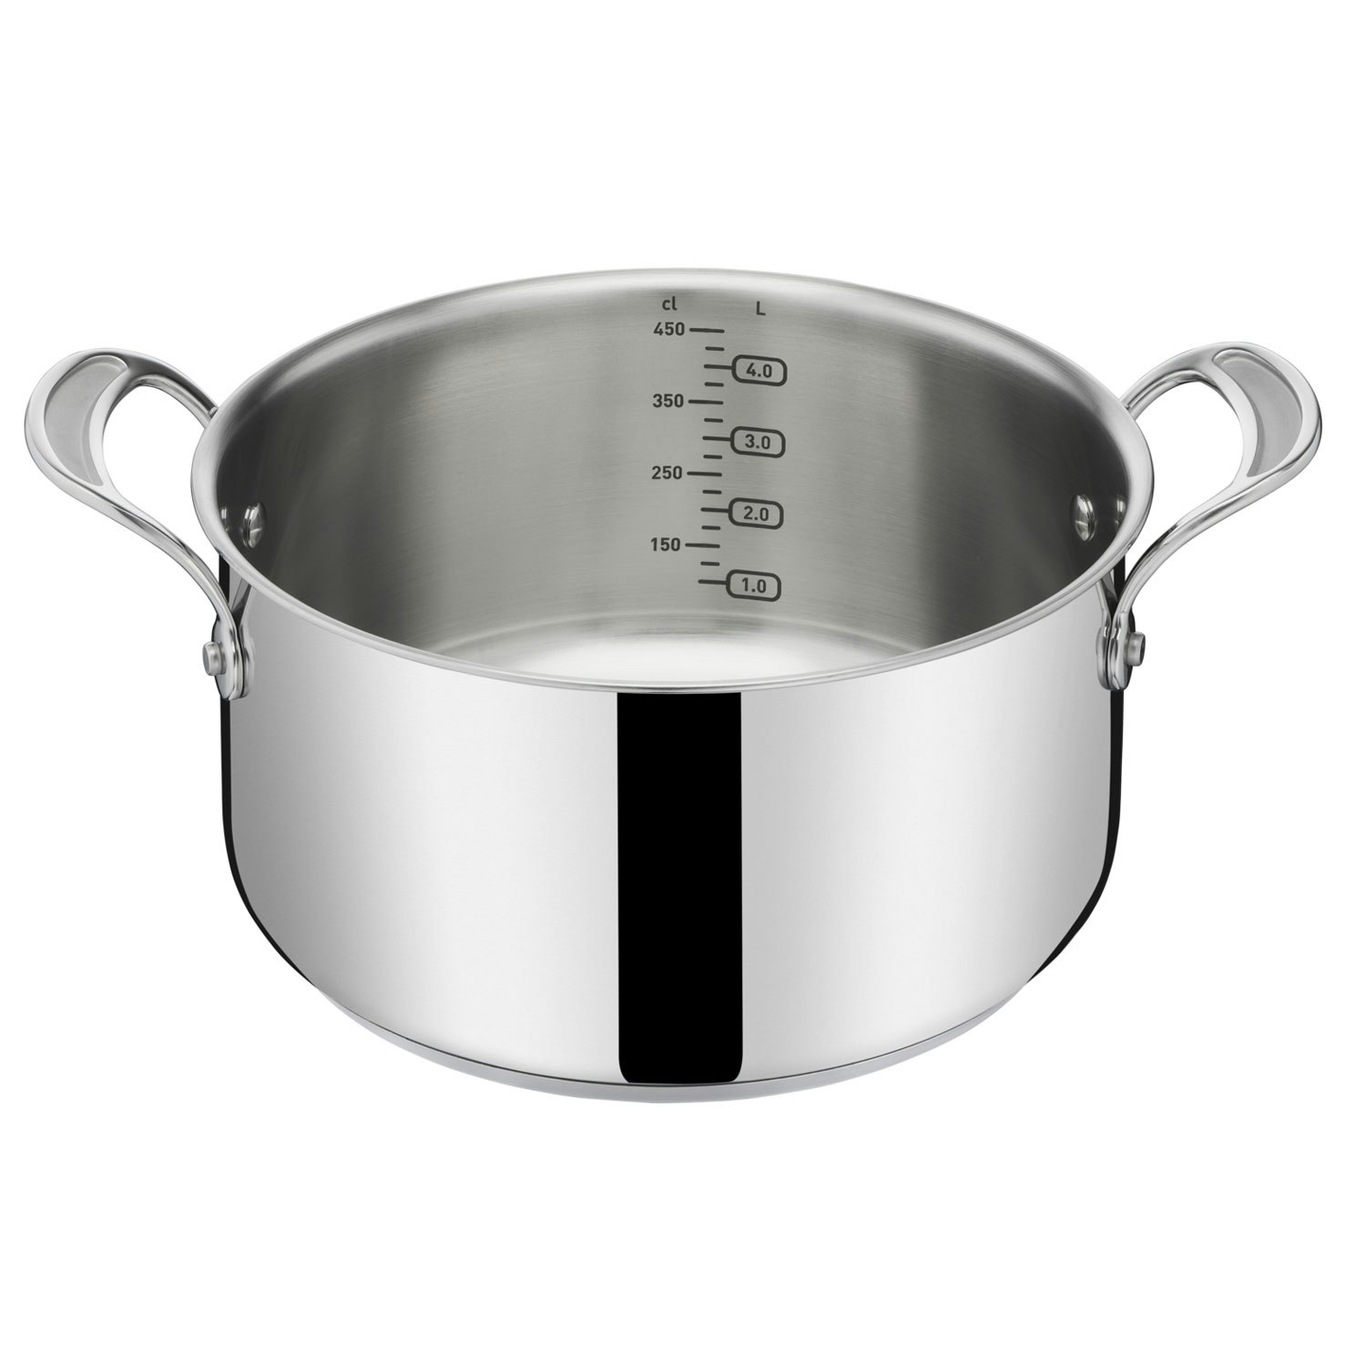 https://royaldesign.com/image/2/tefal-jamie-oliver-cooks-classic-pot-stainless-steel-7?w=800&quality=80